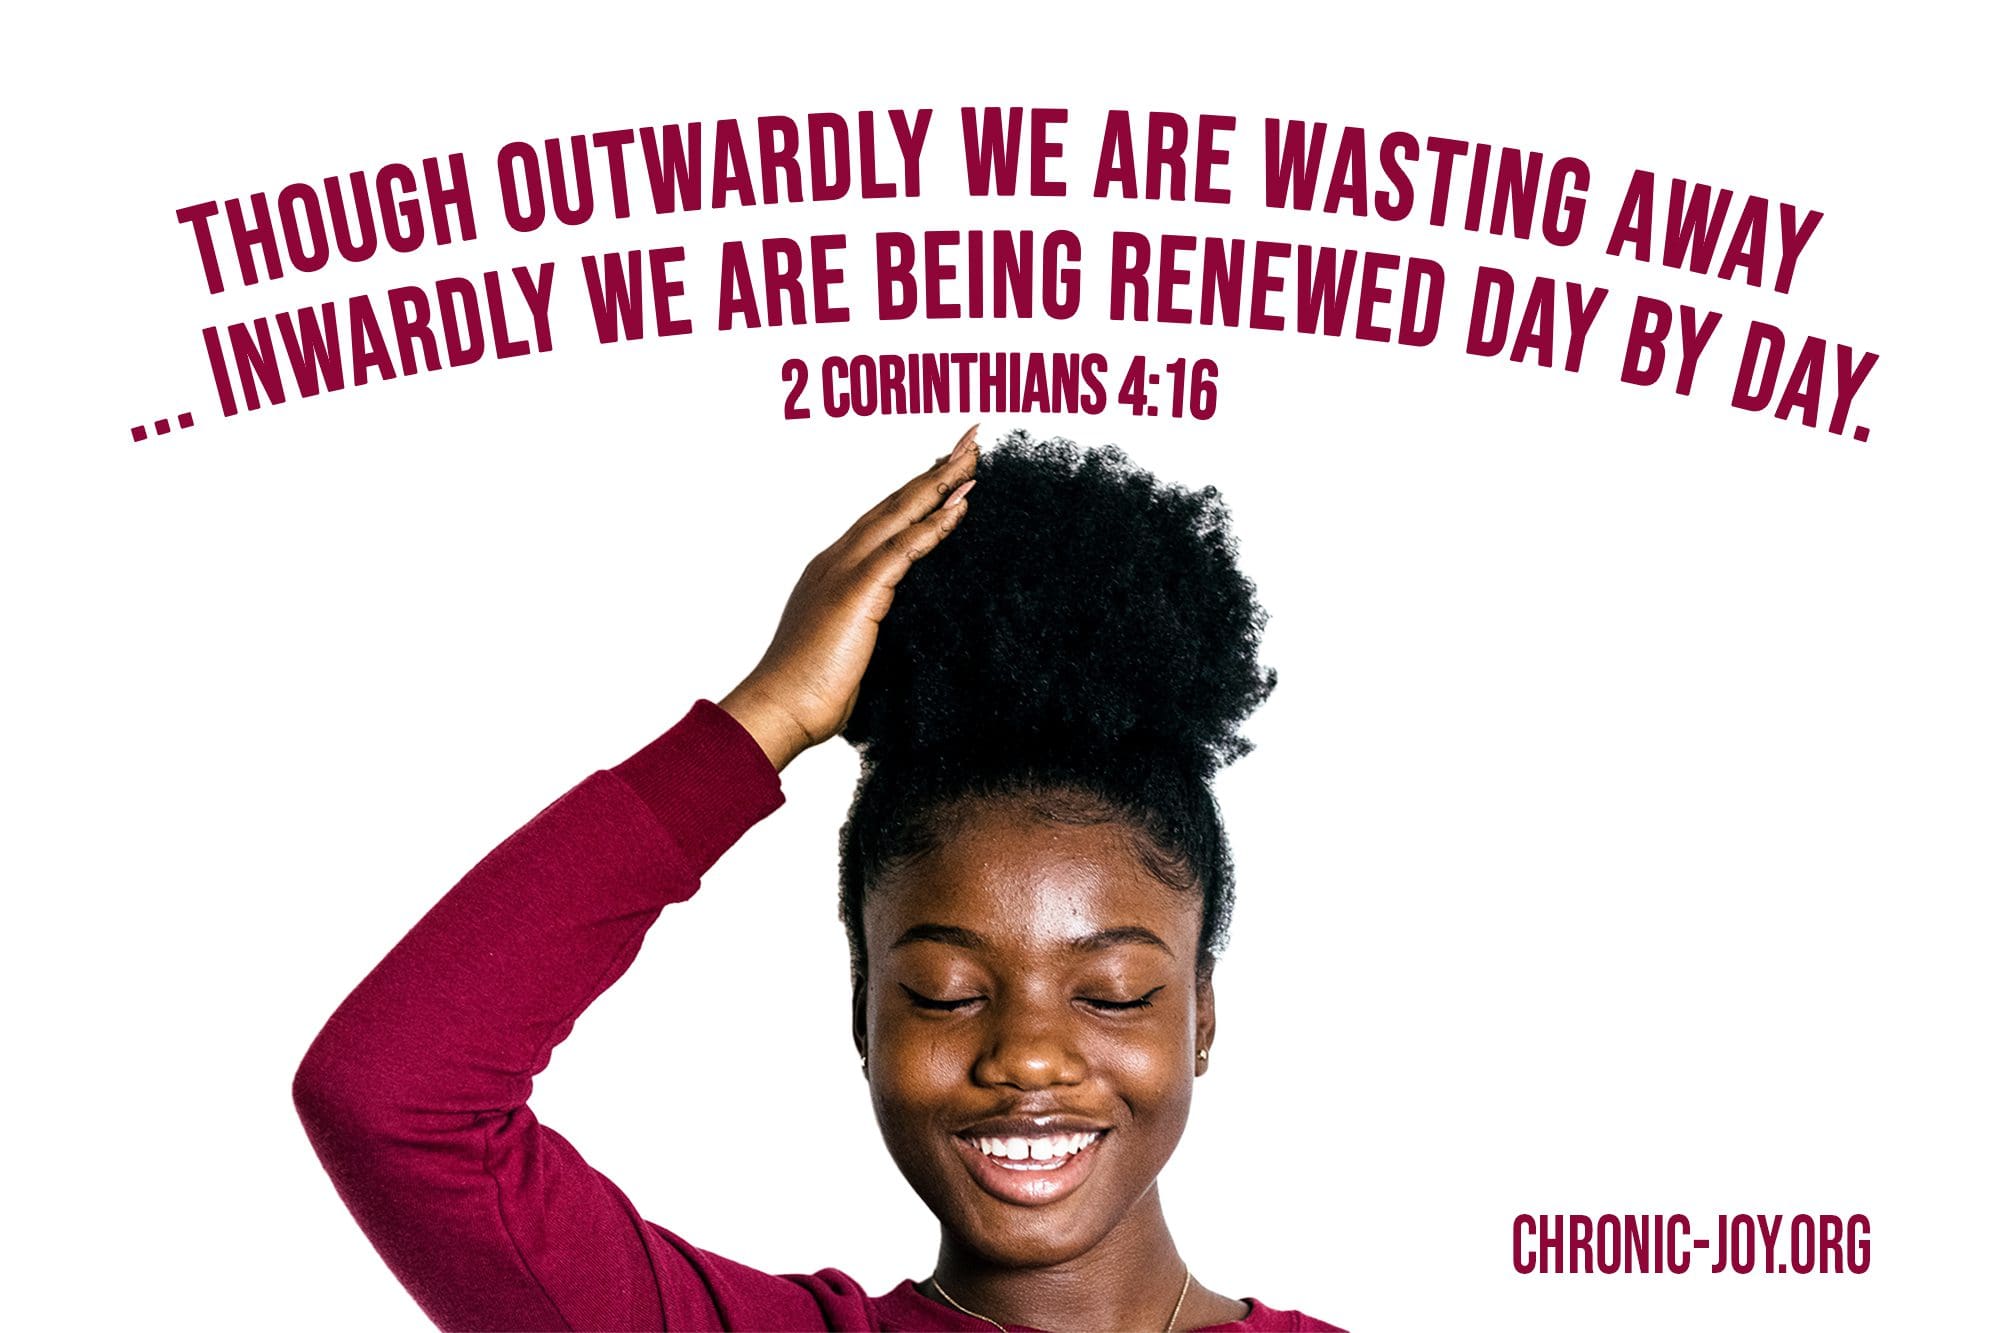 "Though outwardly we are wasting away ... inwardly we are being renewed day by day." 2 Corinthians 4:16